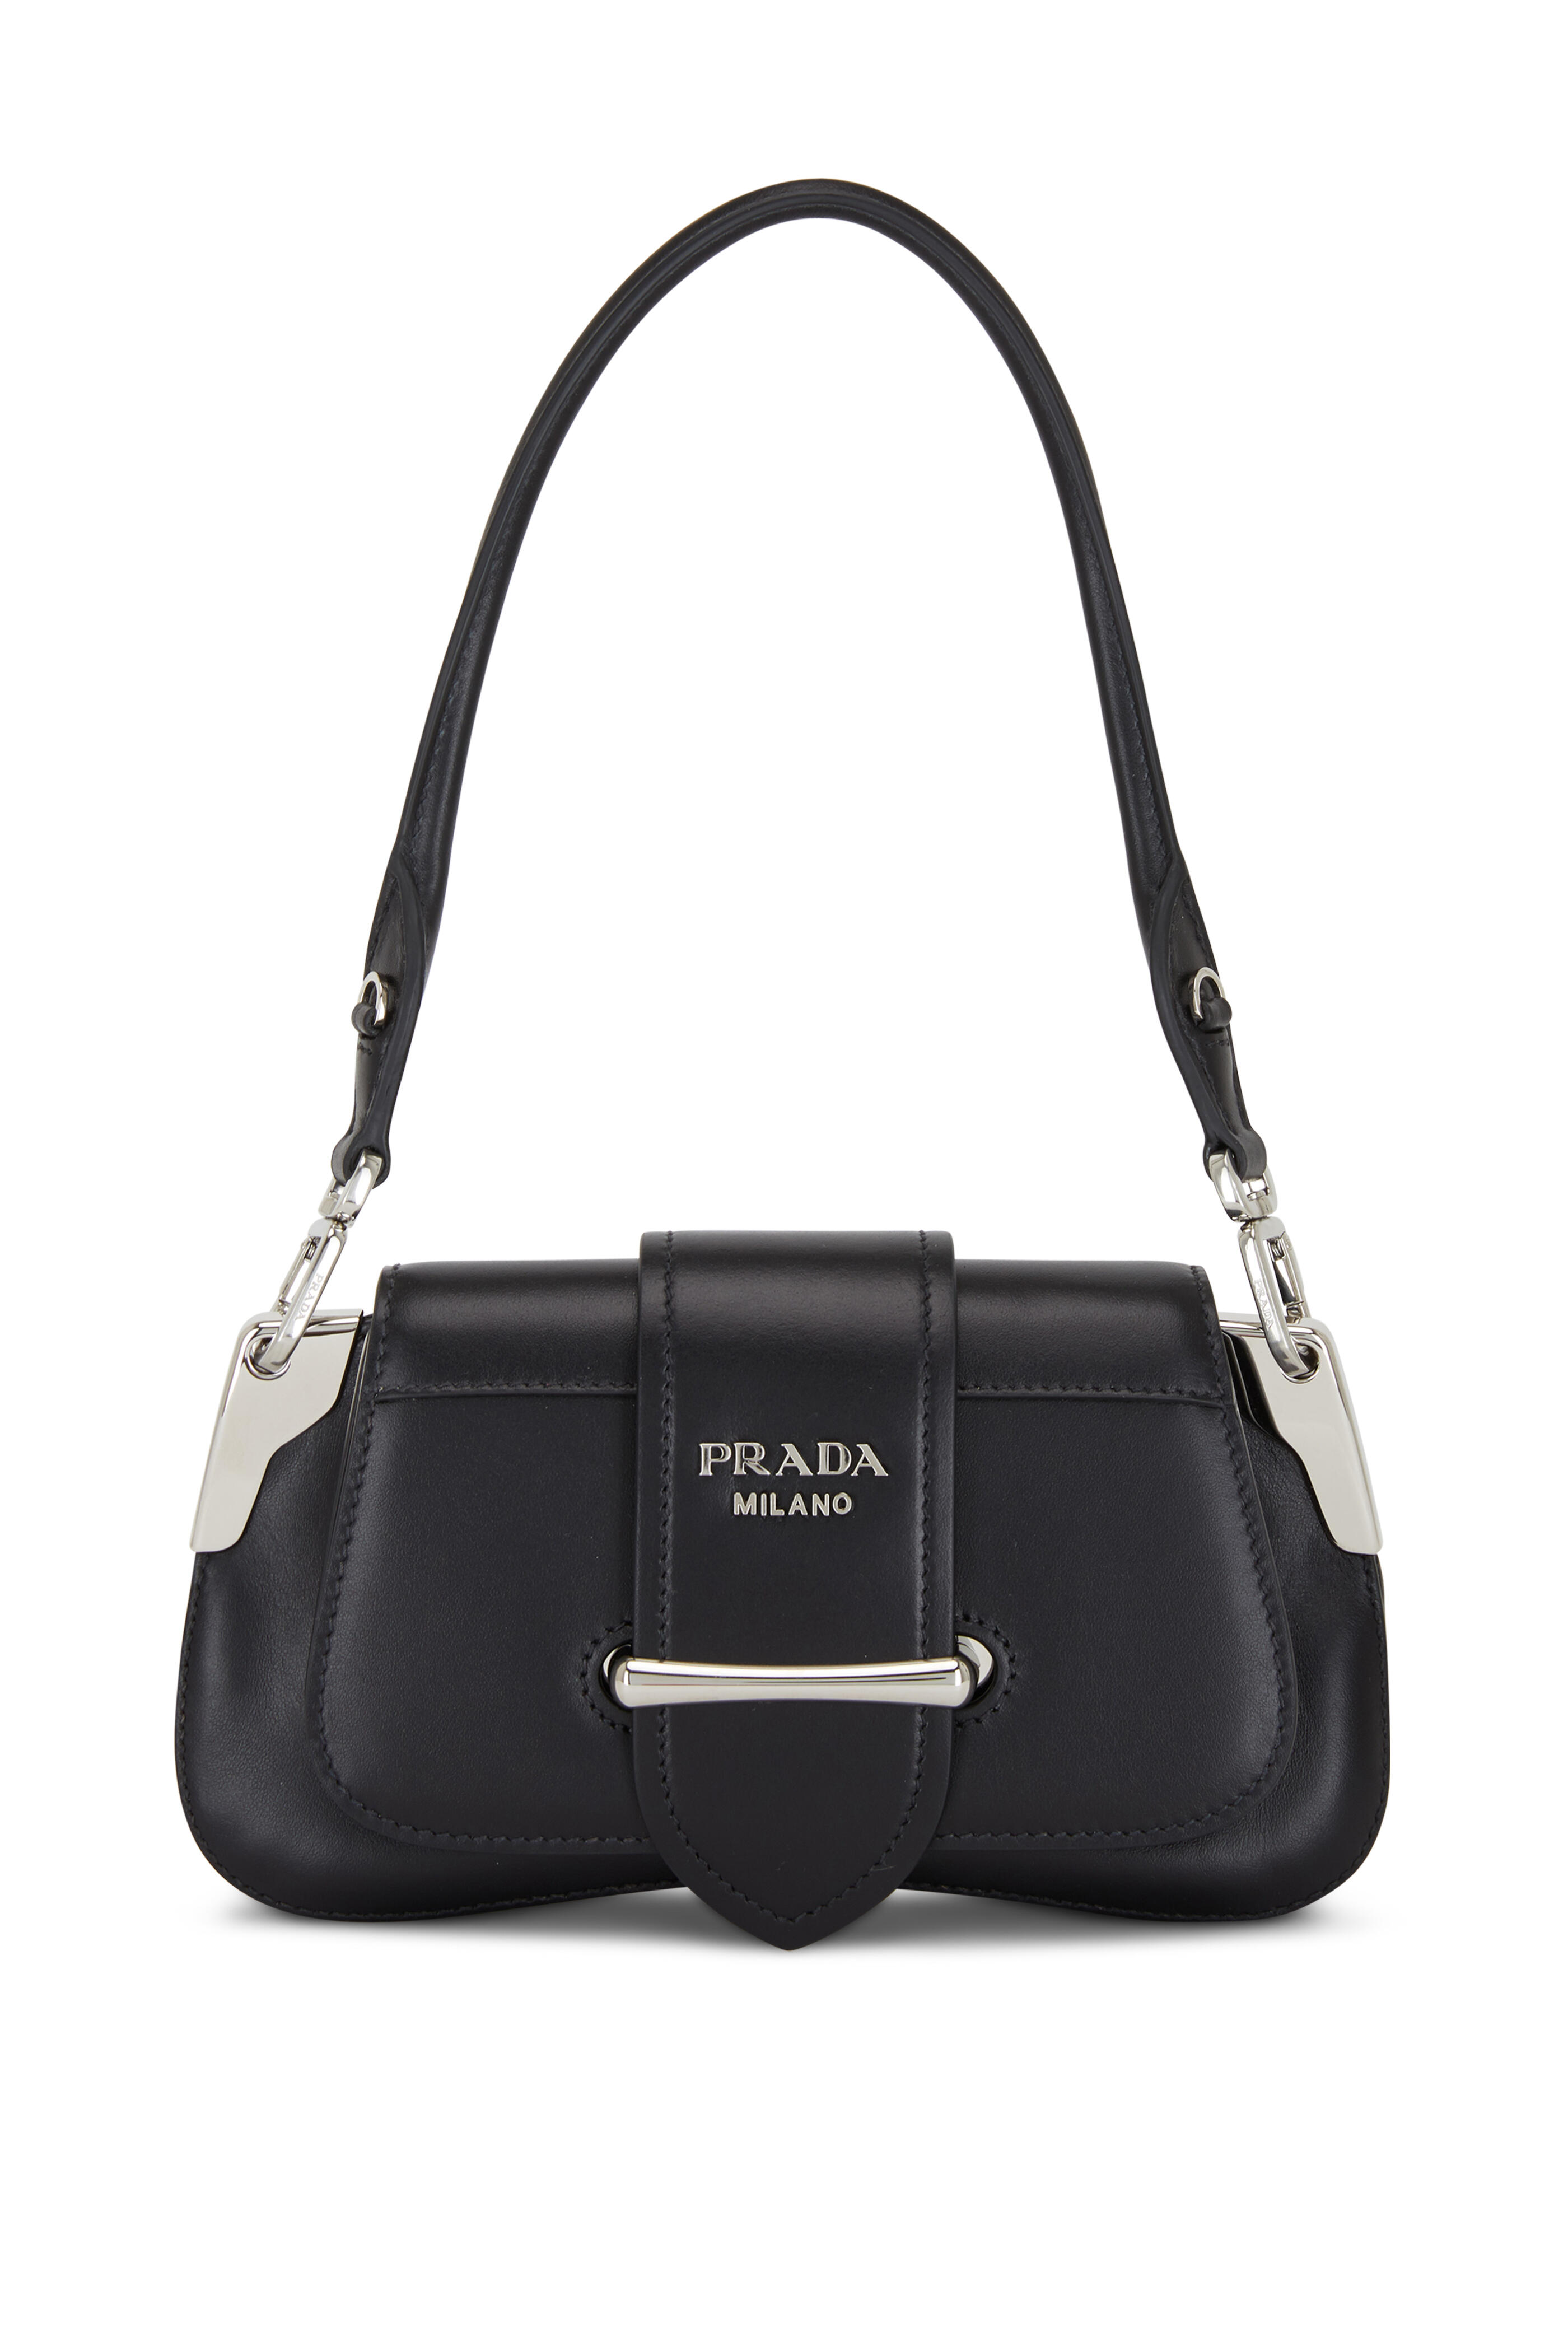 Prada - Black Leather Flap Front Small City Bag | Mitchell Stores